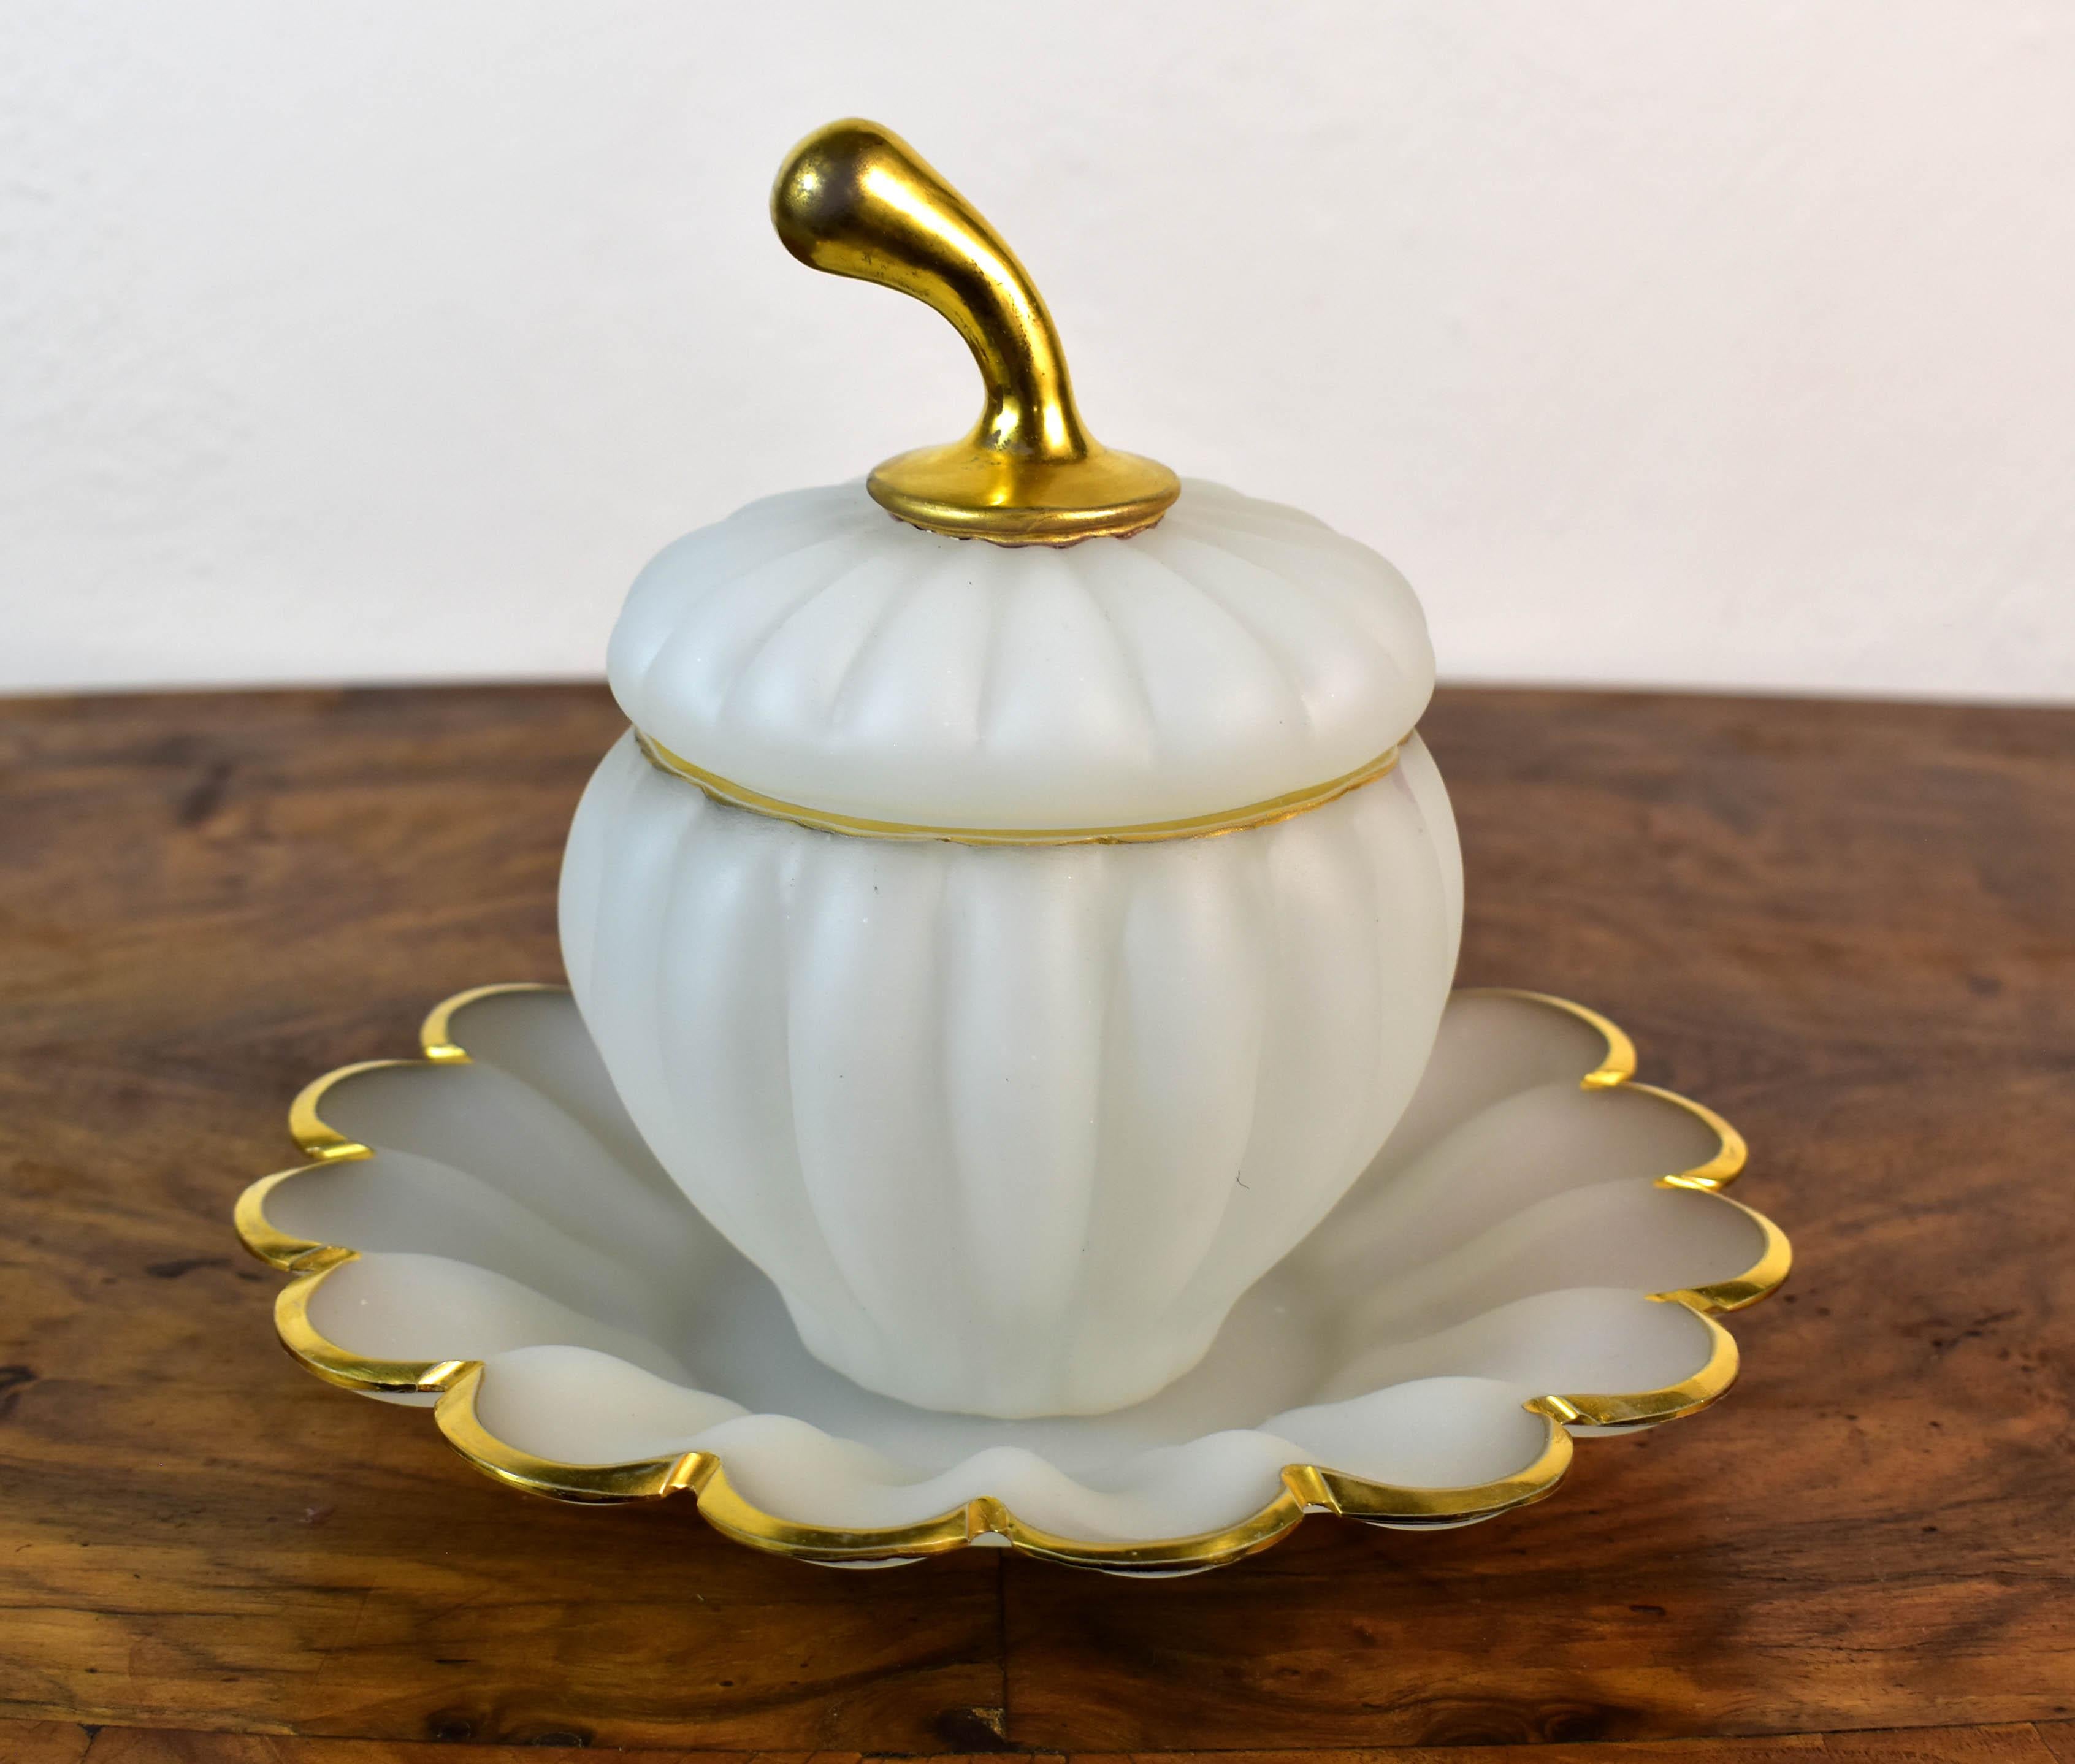 A beautiful and very interesting jar with a plate made of opaline glass. The pumpkin-shaped jar is made of white opaline with a gold chip, and the plate is also complemented by a gold painting. It is an interesting and unusual shape, just like the